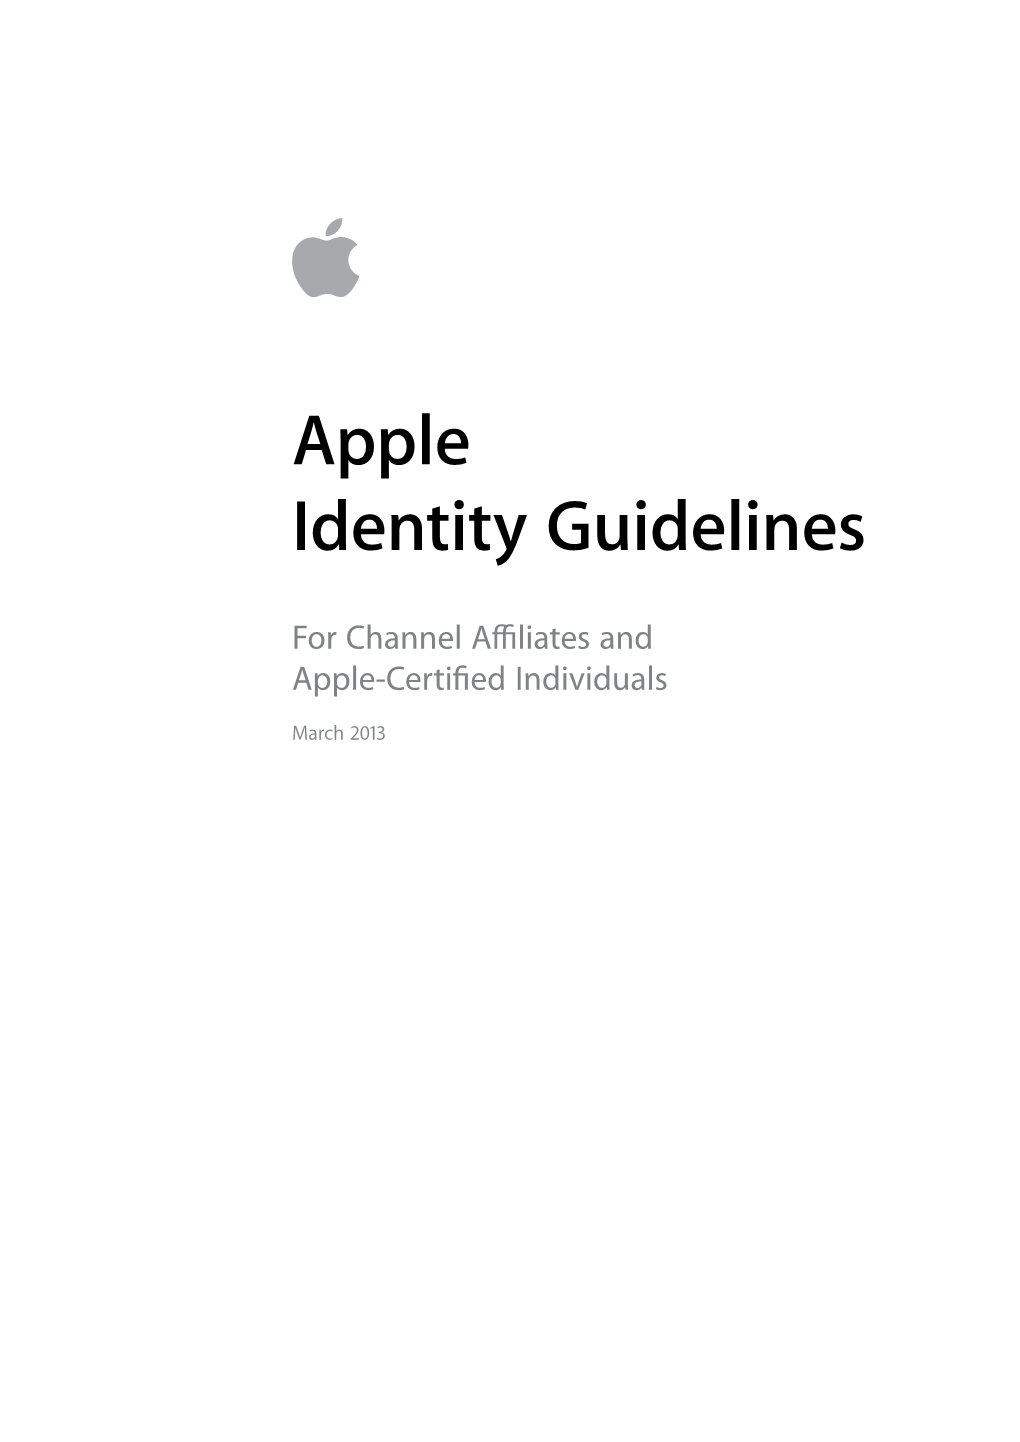 Apple Logo with a Logotype—A Name Like “Authorized Reseller” Set in Specially Designed Type